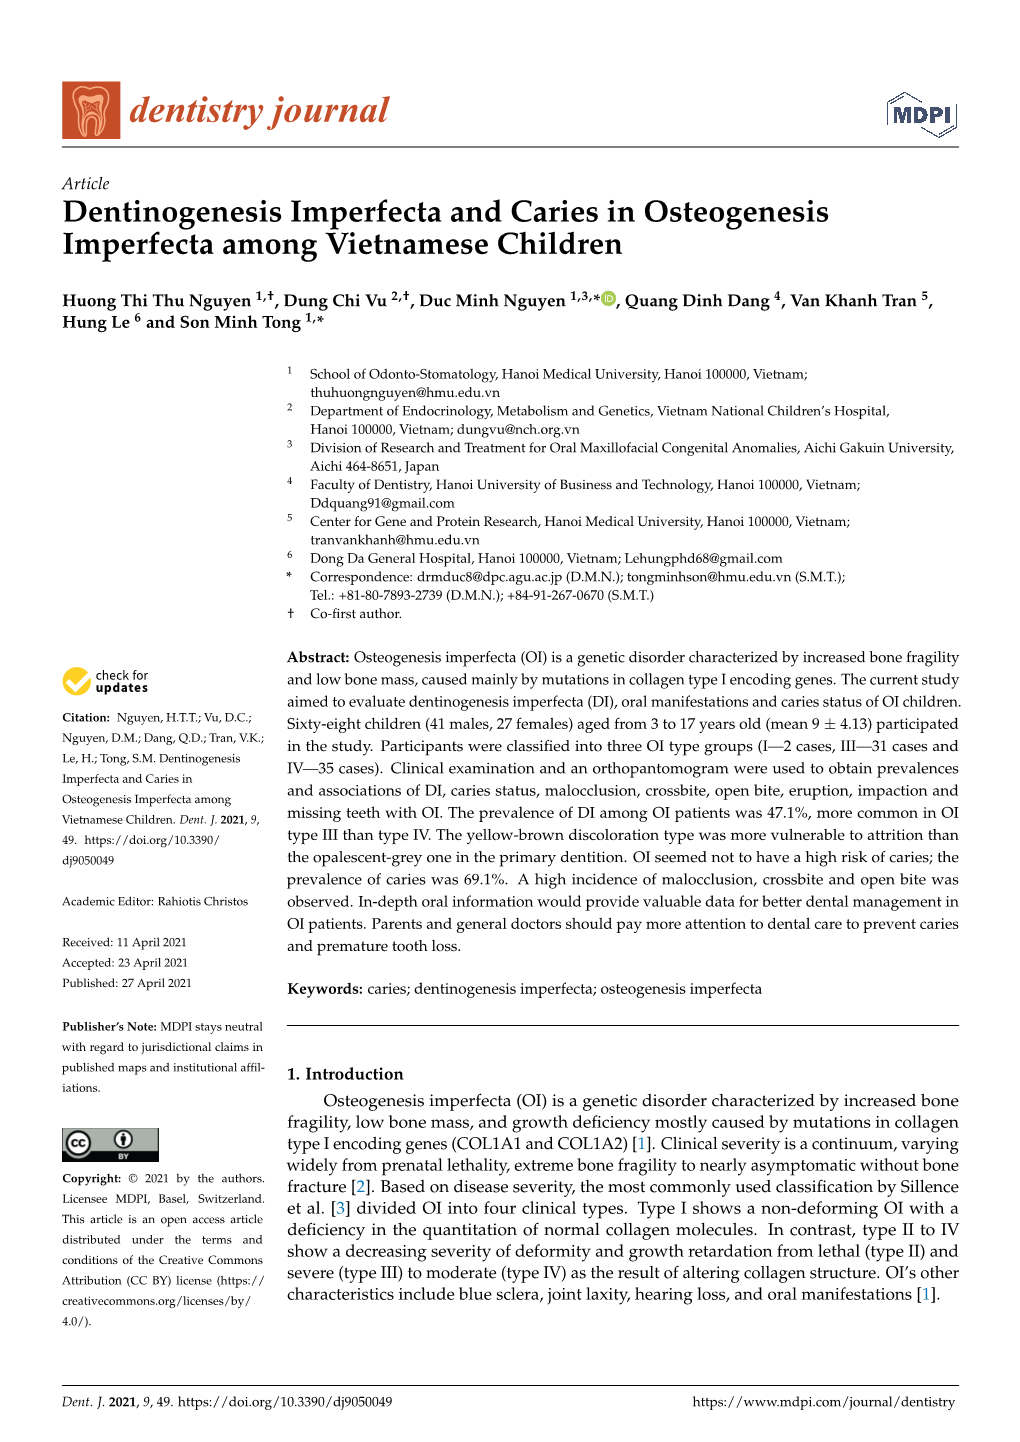 Dentinogenesis Imperfecta and Caries in Osteogenesis Imperfecta Among Vietnamese Children